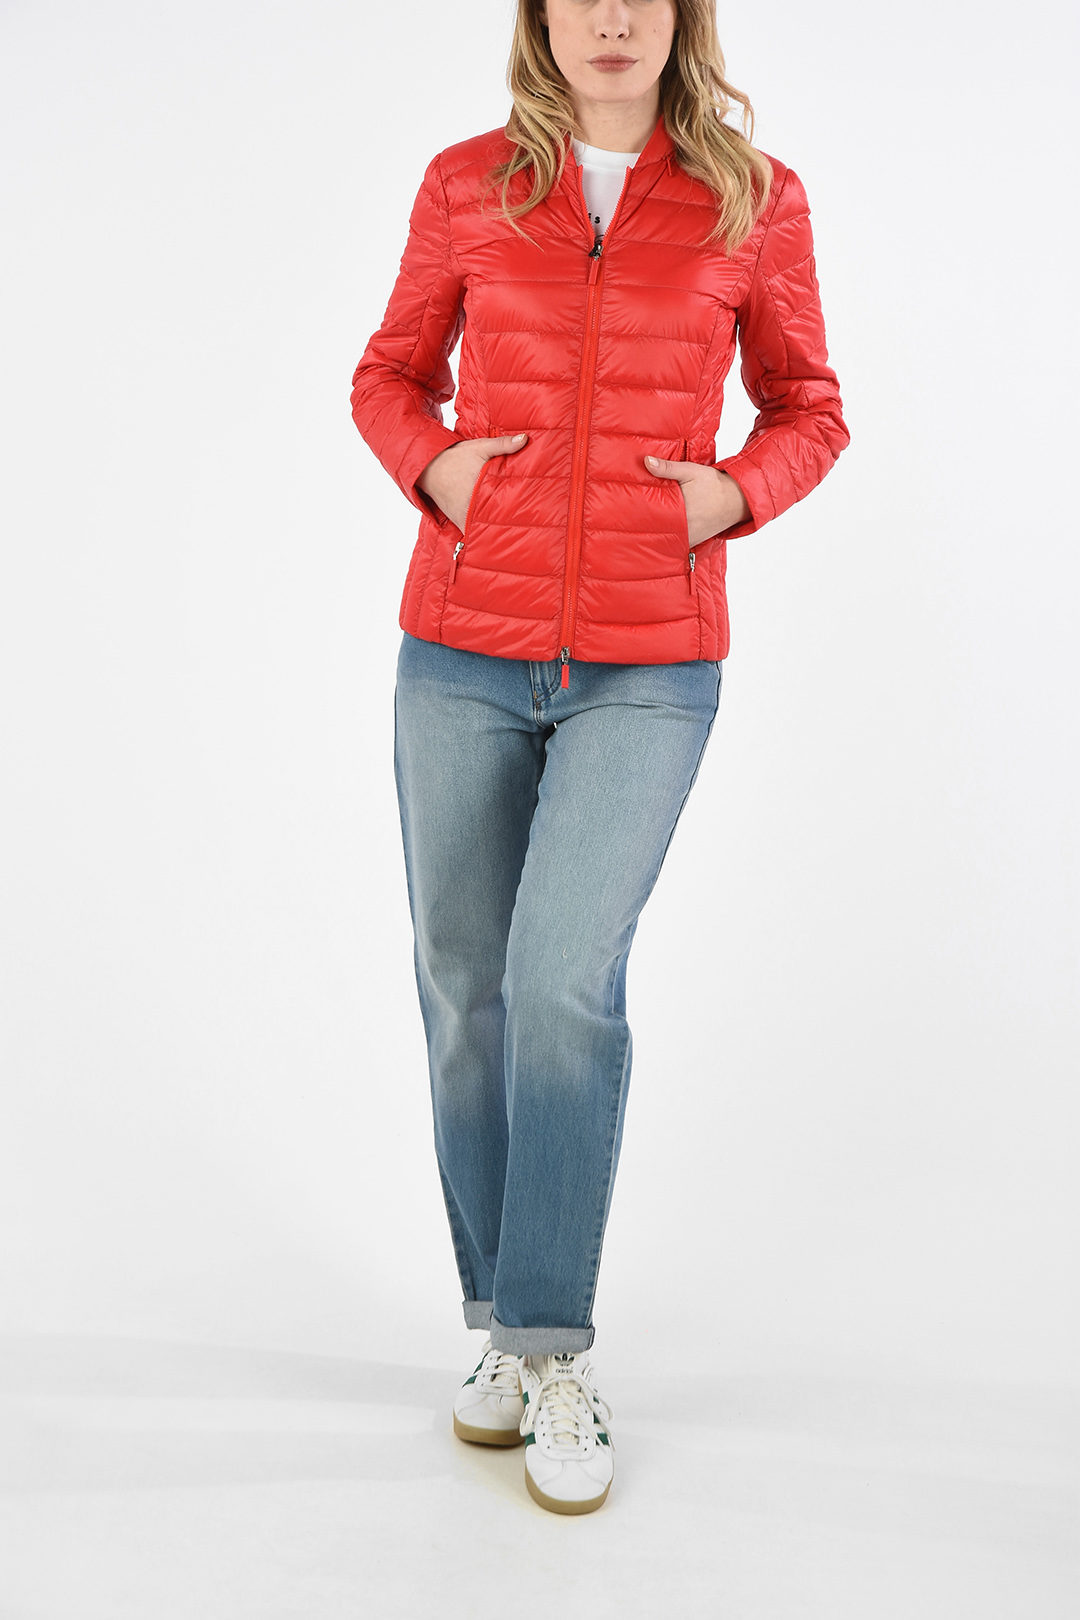 Armani ARMANI EXCHANGE Lightweigh Down Jacket with Extractable Hood women -  Glamood Outlet